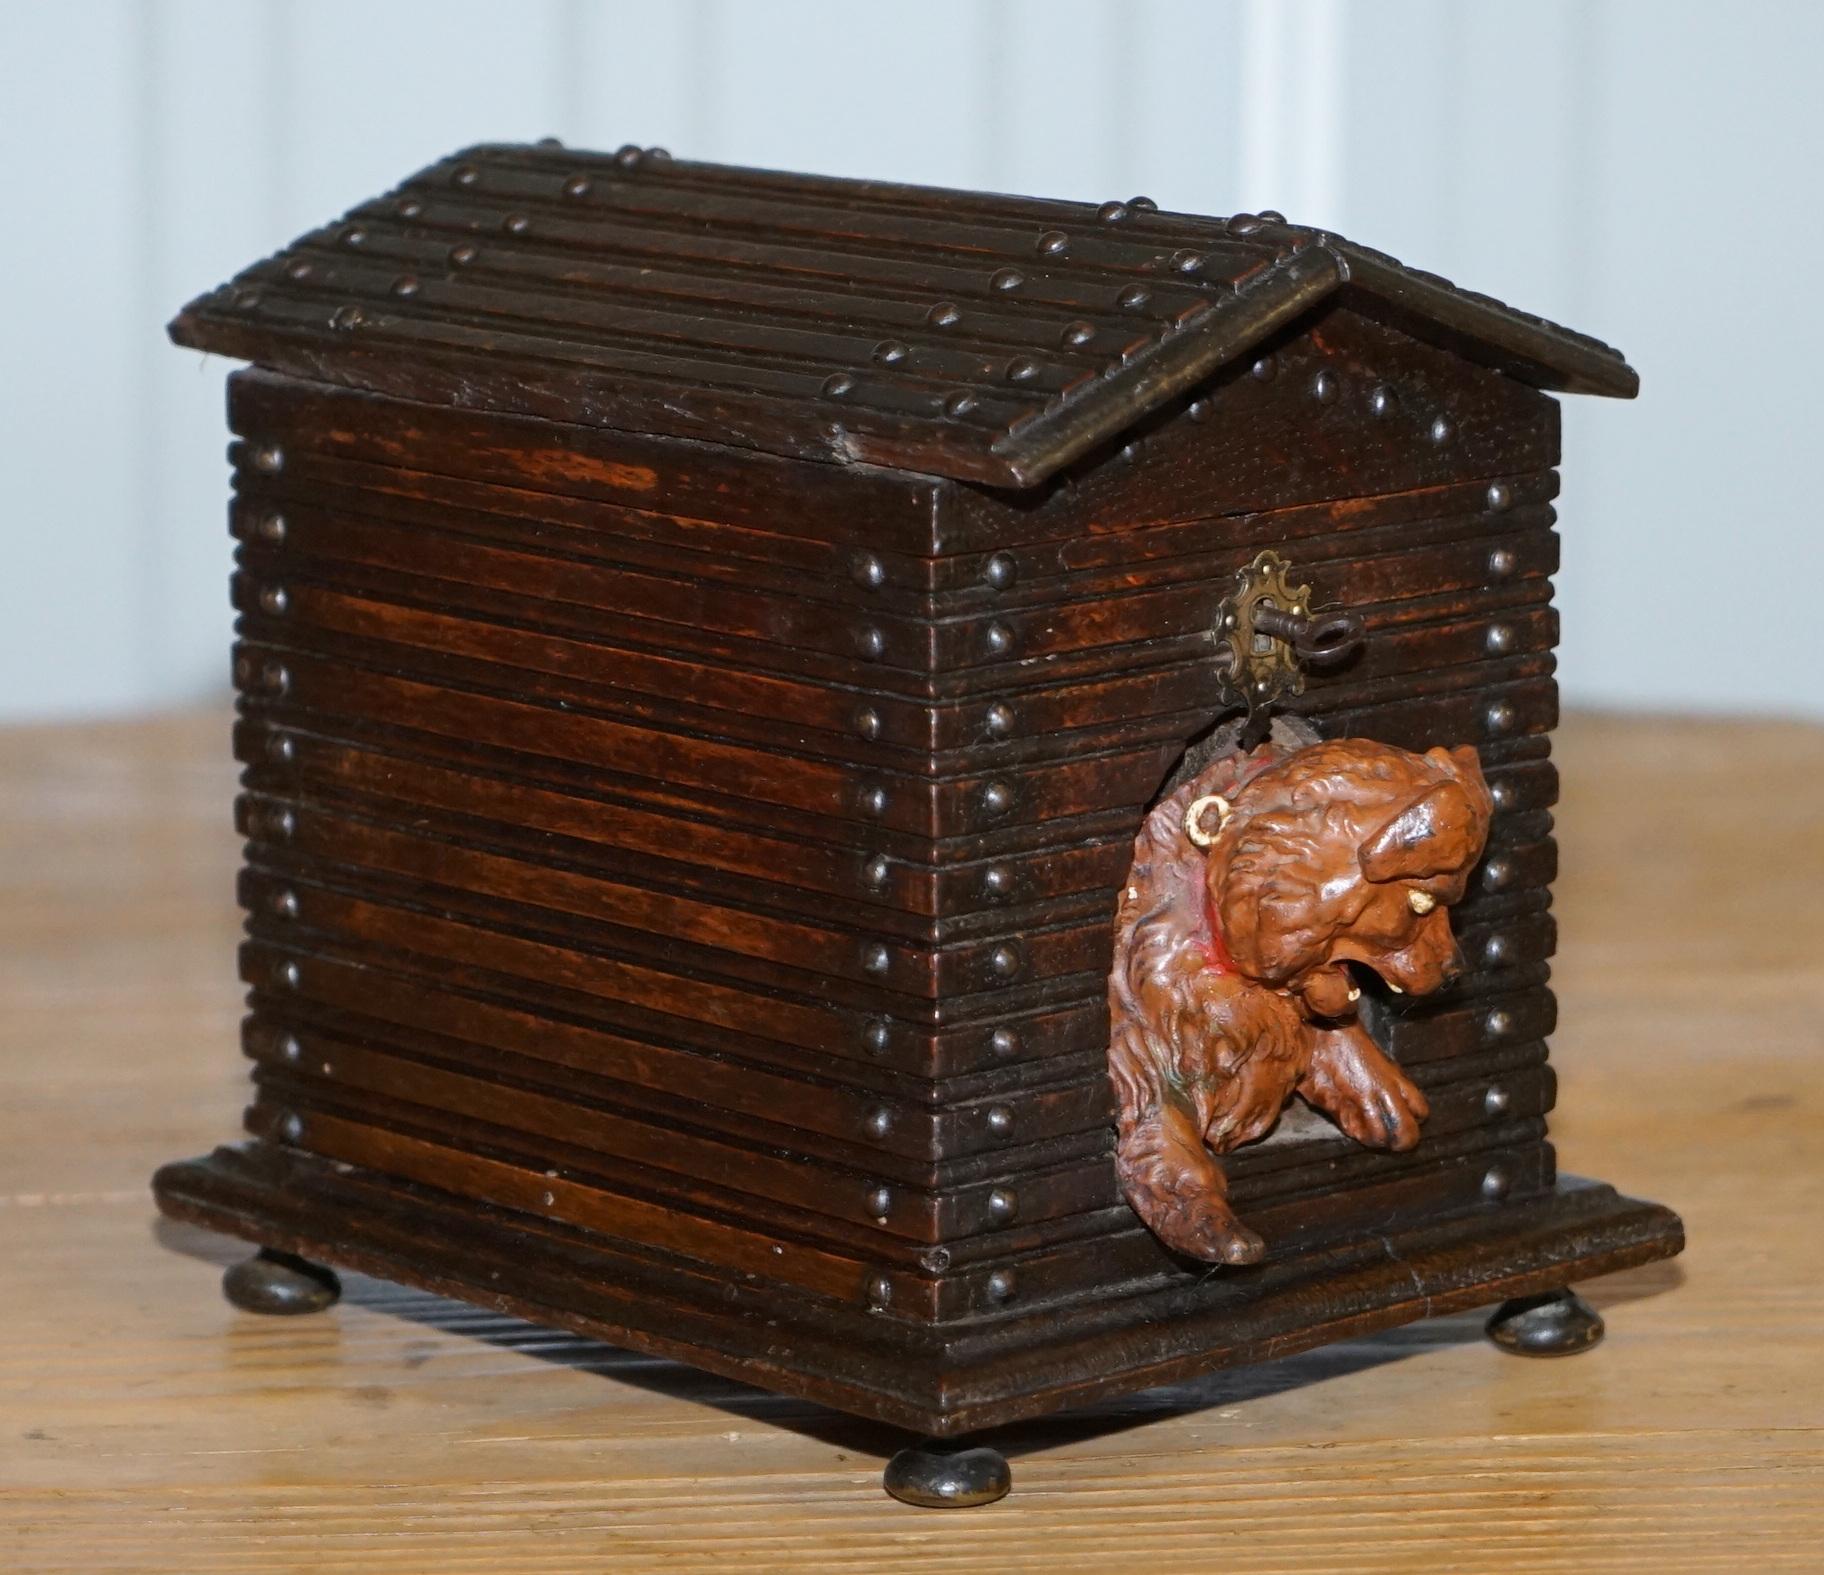 We are delighted to offer for sale this stunning original circa 1870 Black forest wood carved cigar box humidor in the form of a dog kennel

A good looking master craftsman carved cigar box complete with the original key and very angry dog